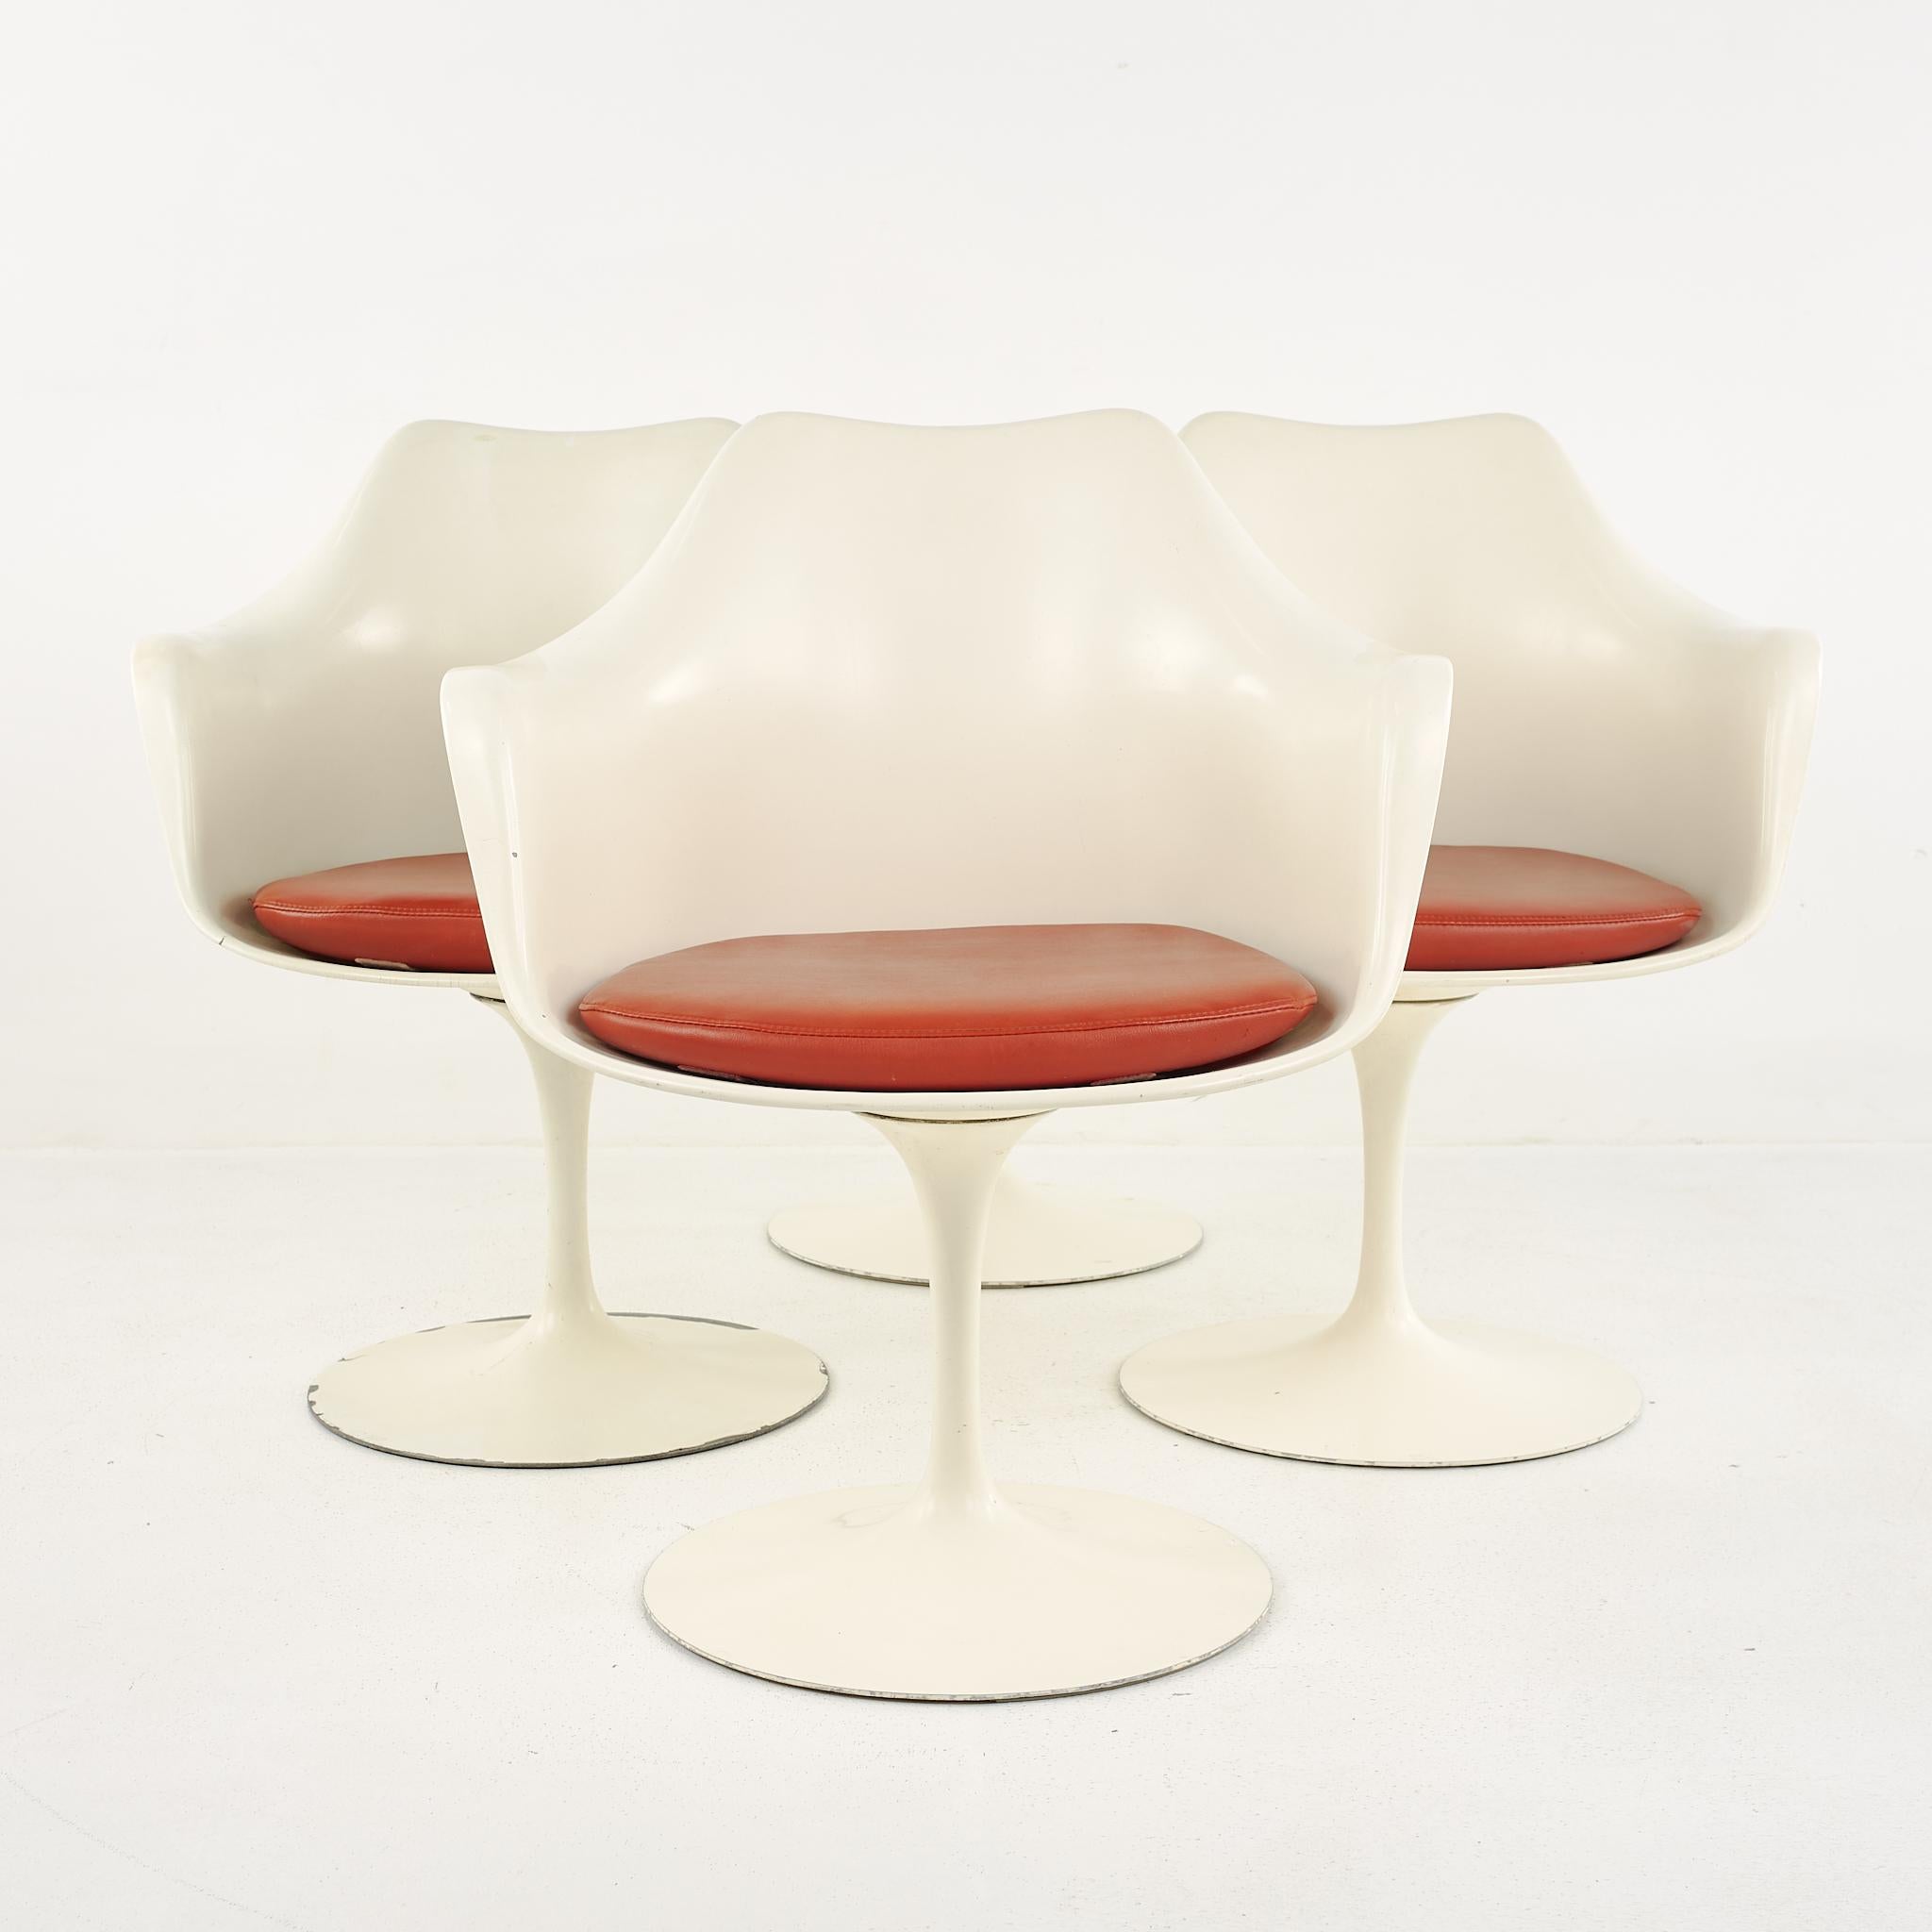 Eero Saarinen for Knoll mid century Tulip chairs - Set of 4

Each chair measures: 25.5 wide x 23.5 deep x 32 high, with a seat height of 17 inches and arm height/chair clearance of 25.25 inches 

All pieces of furniture can be had in what we